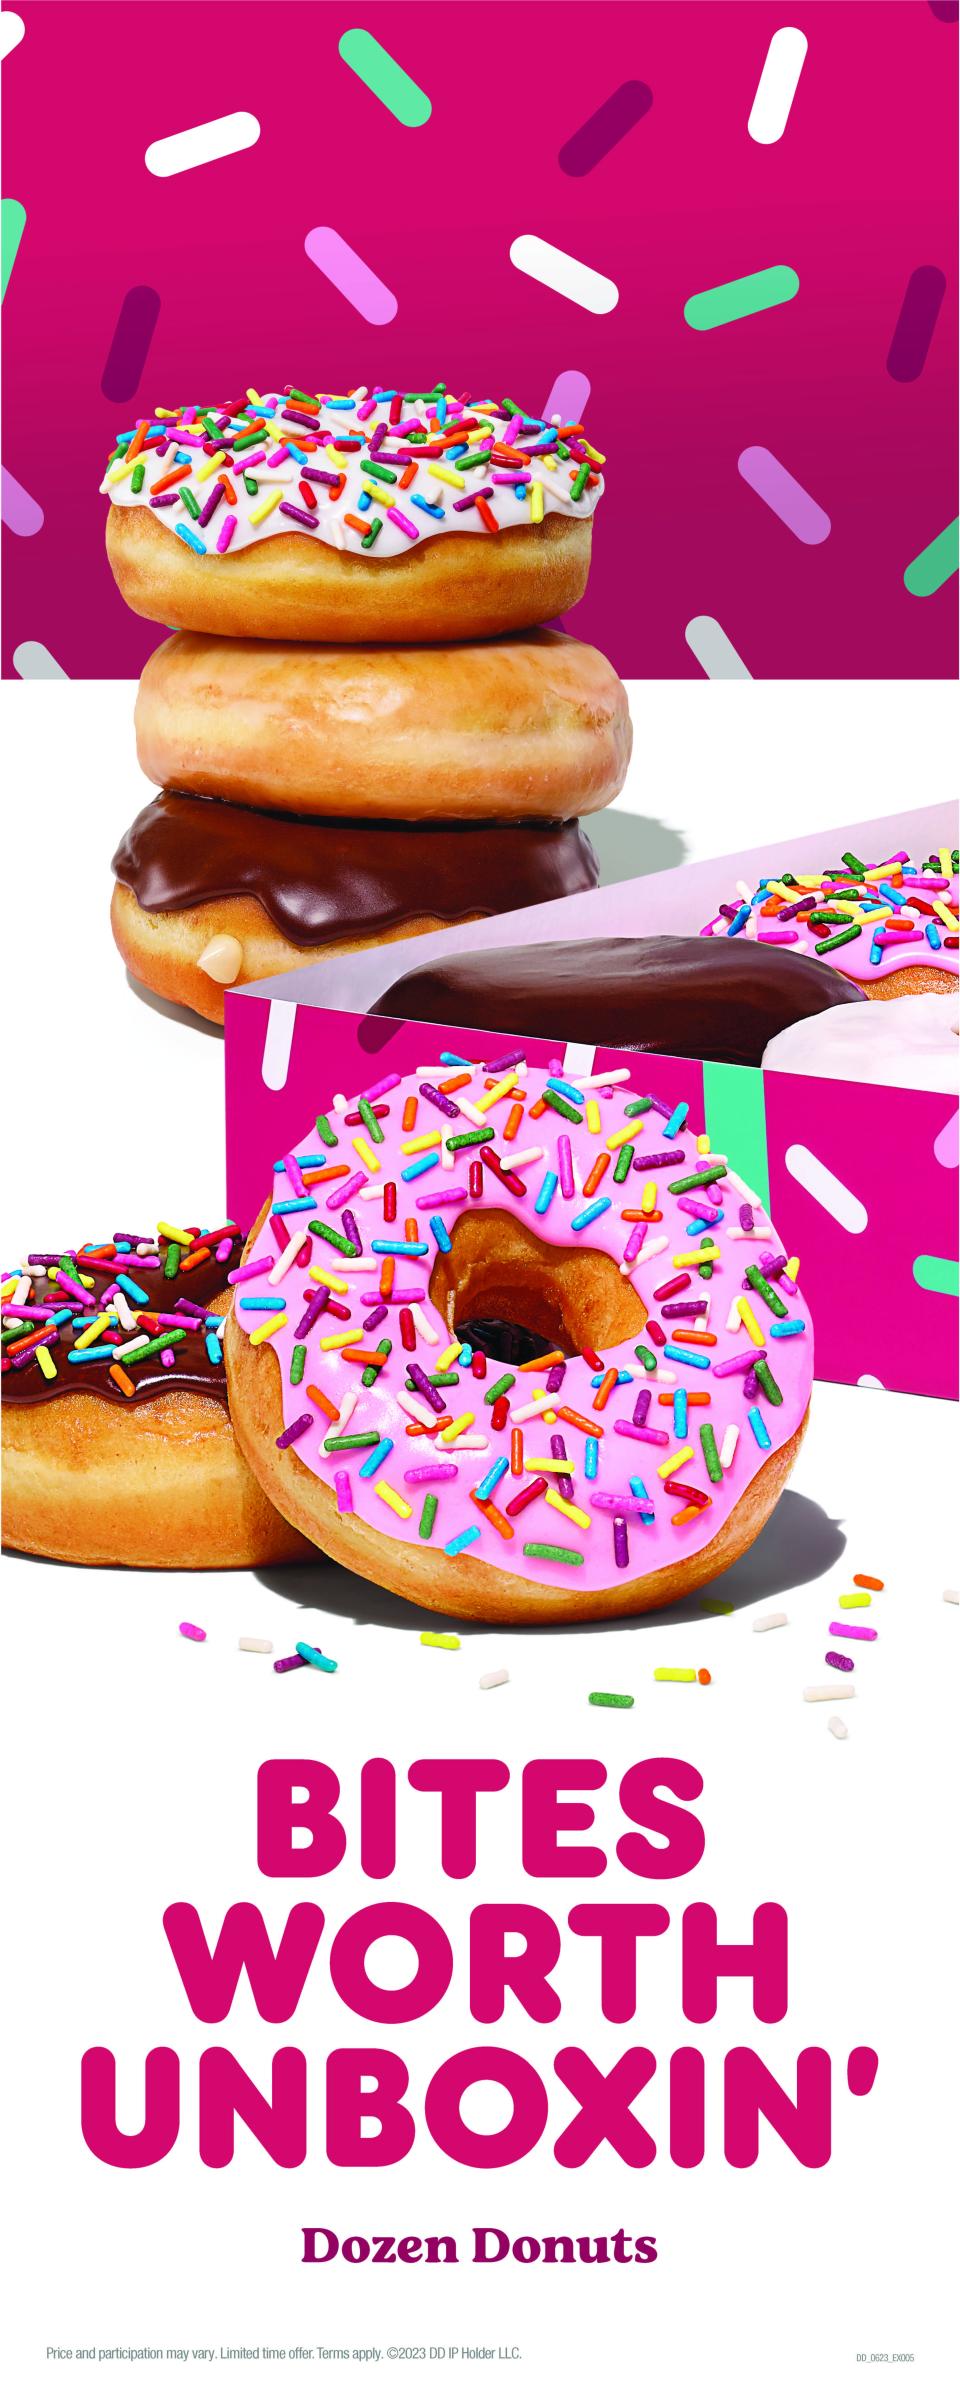 Dunkin' is giving members of its Dunkin' Rewards loyalty program a free classic donut with the purchase of any drink each Wednesday through the month of December.